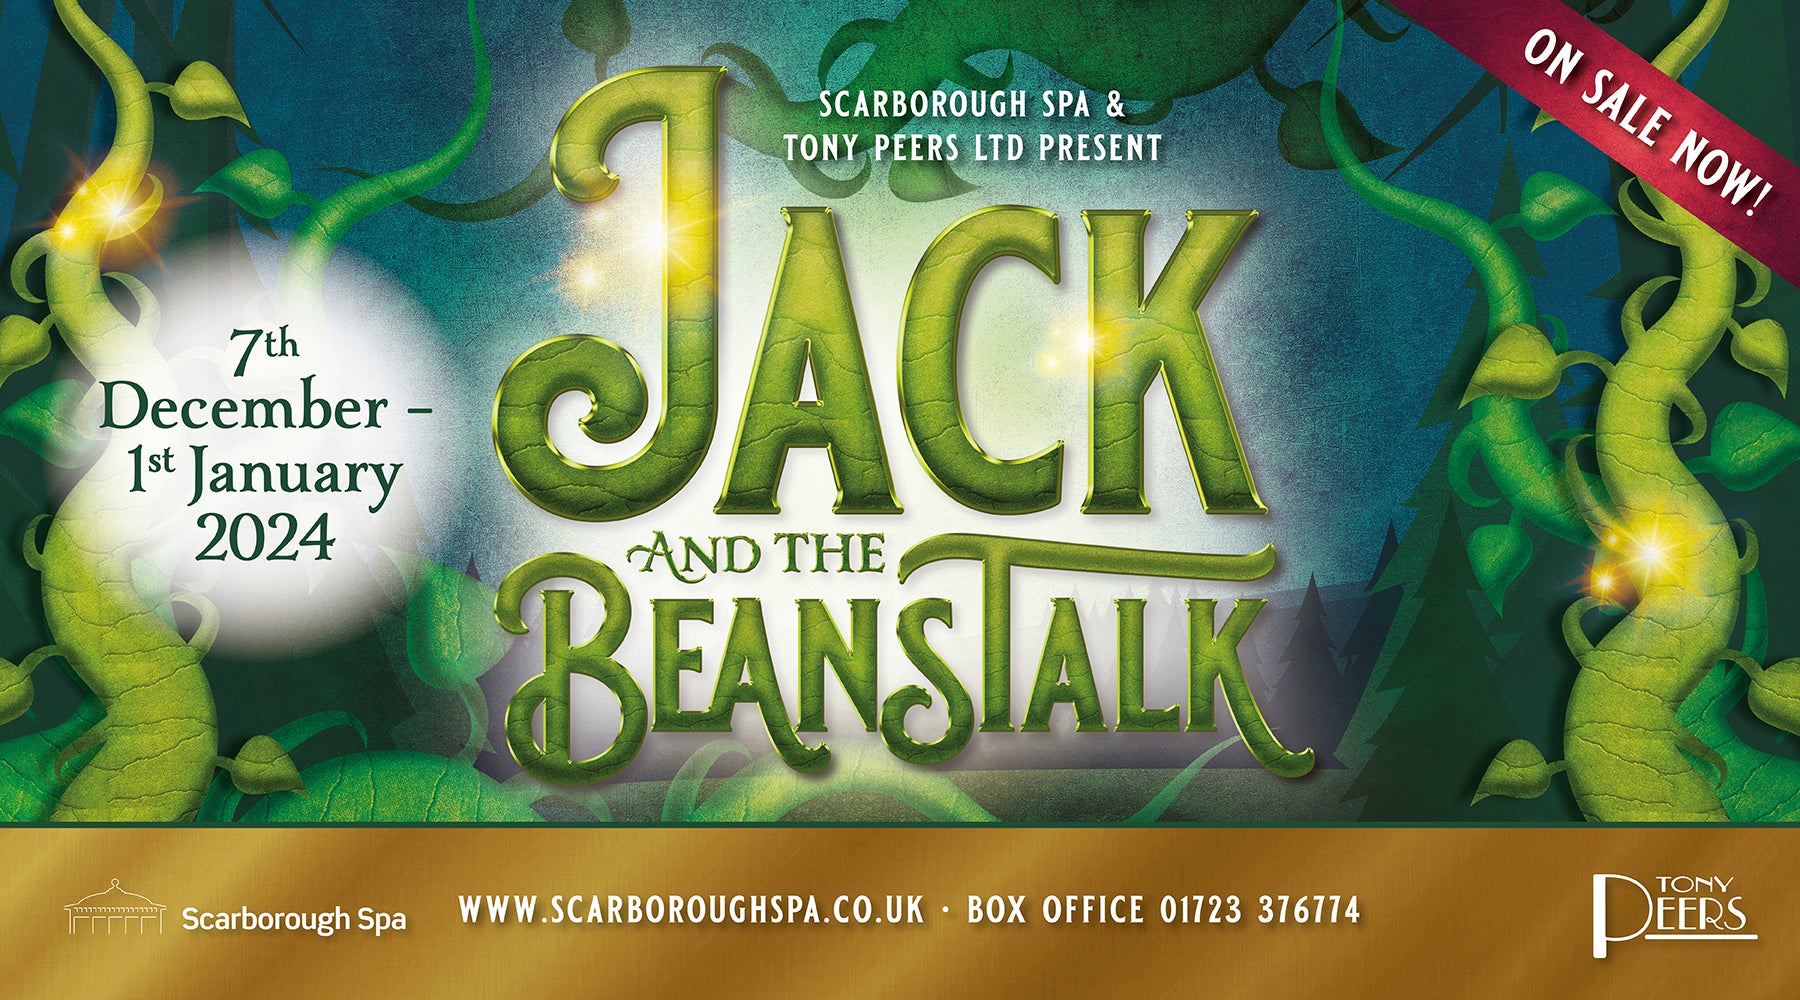 Image name Jack and the Beanstalk at Scarborough Spa Theatre Scarborough the 1 image from the post Jack and the Beanstalk at Scarborough Spa Theatre, Scarborough in Yorkshire.com.